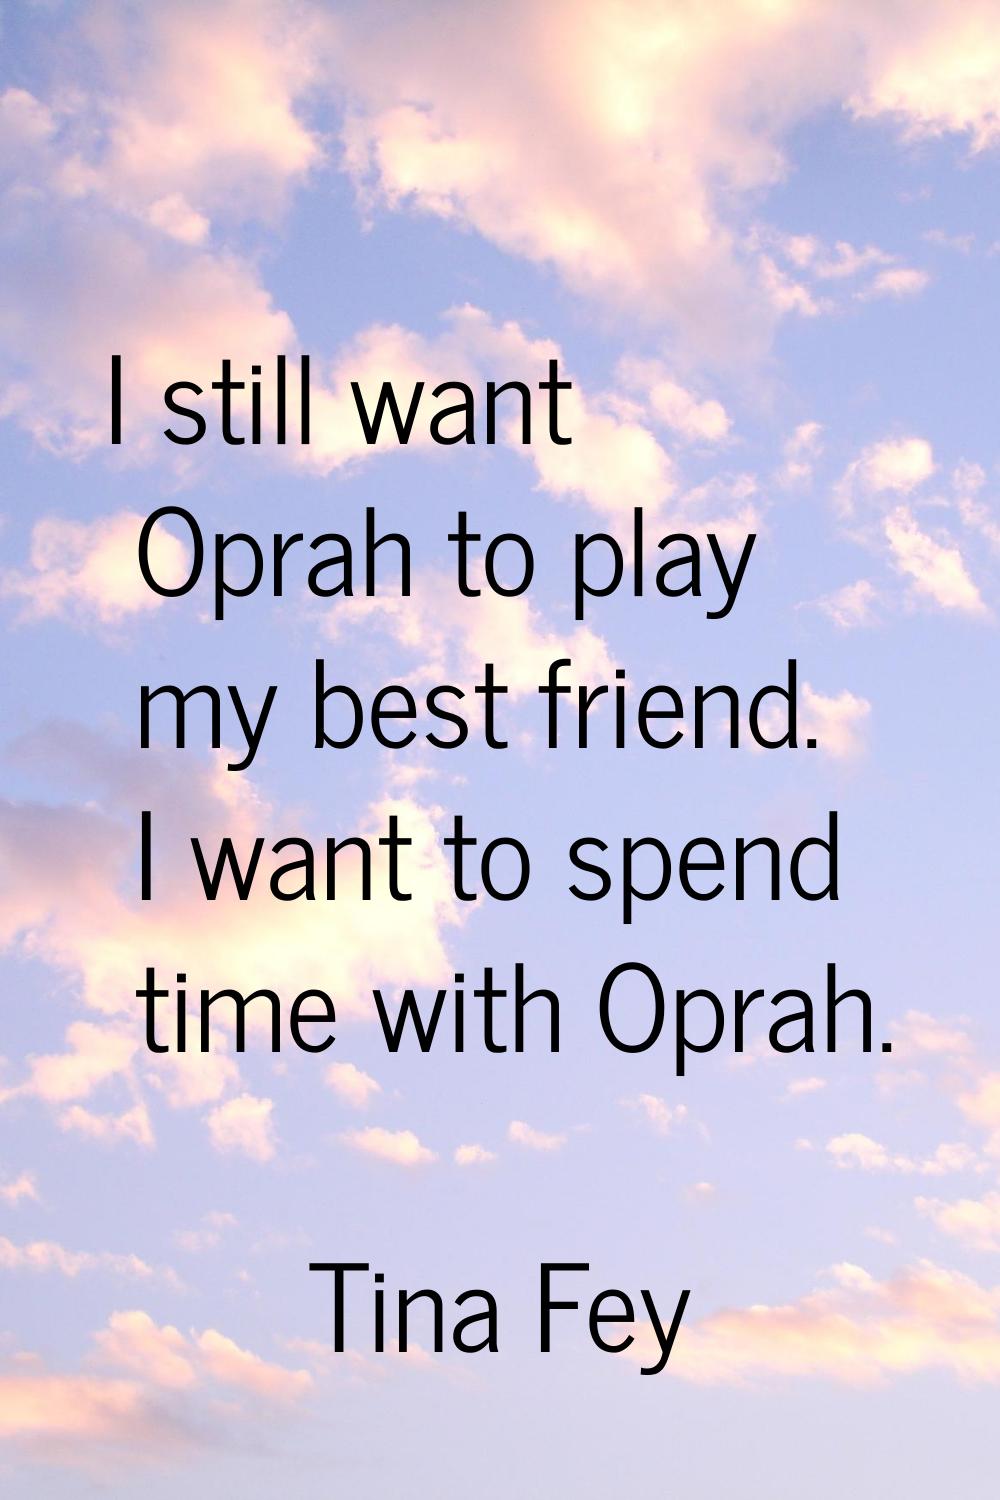 I still want Oprah to play my best friend. I want to spend time with Oprah.